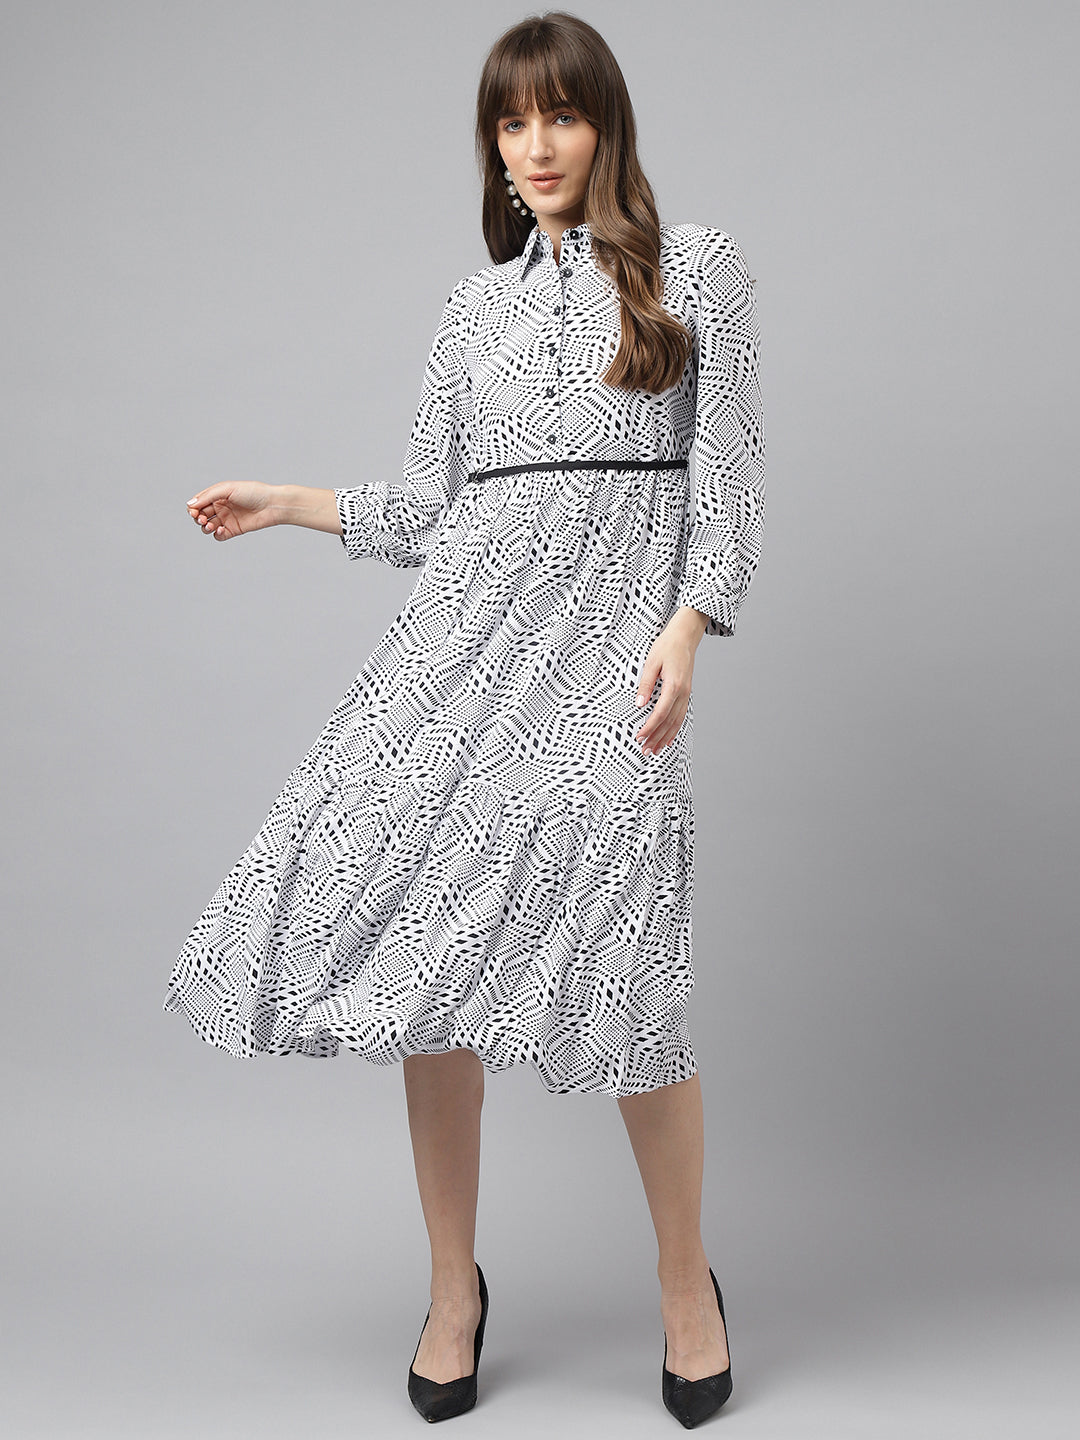 Ivory Shirt Collar 3/4 Sleeves Printed A-Line Dress For Casual Wear